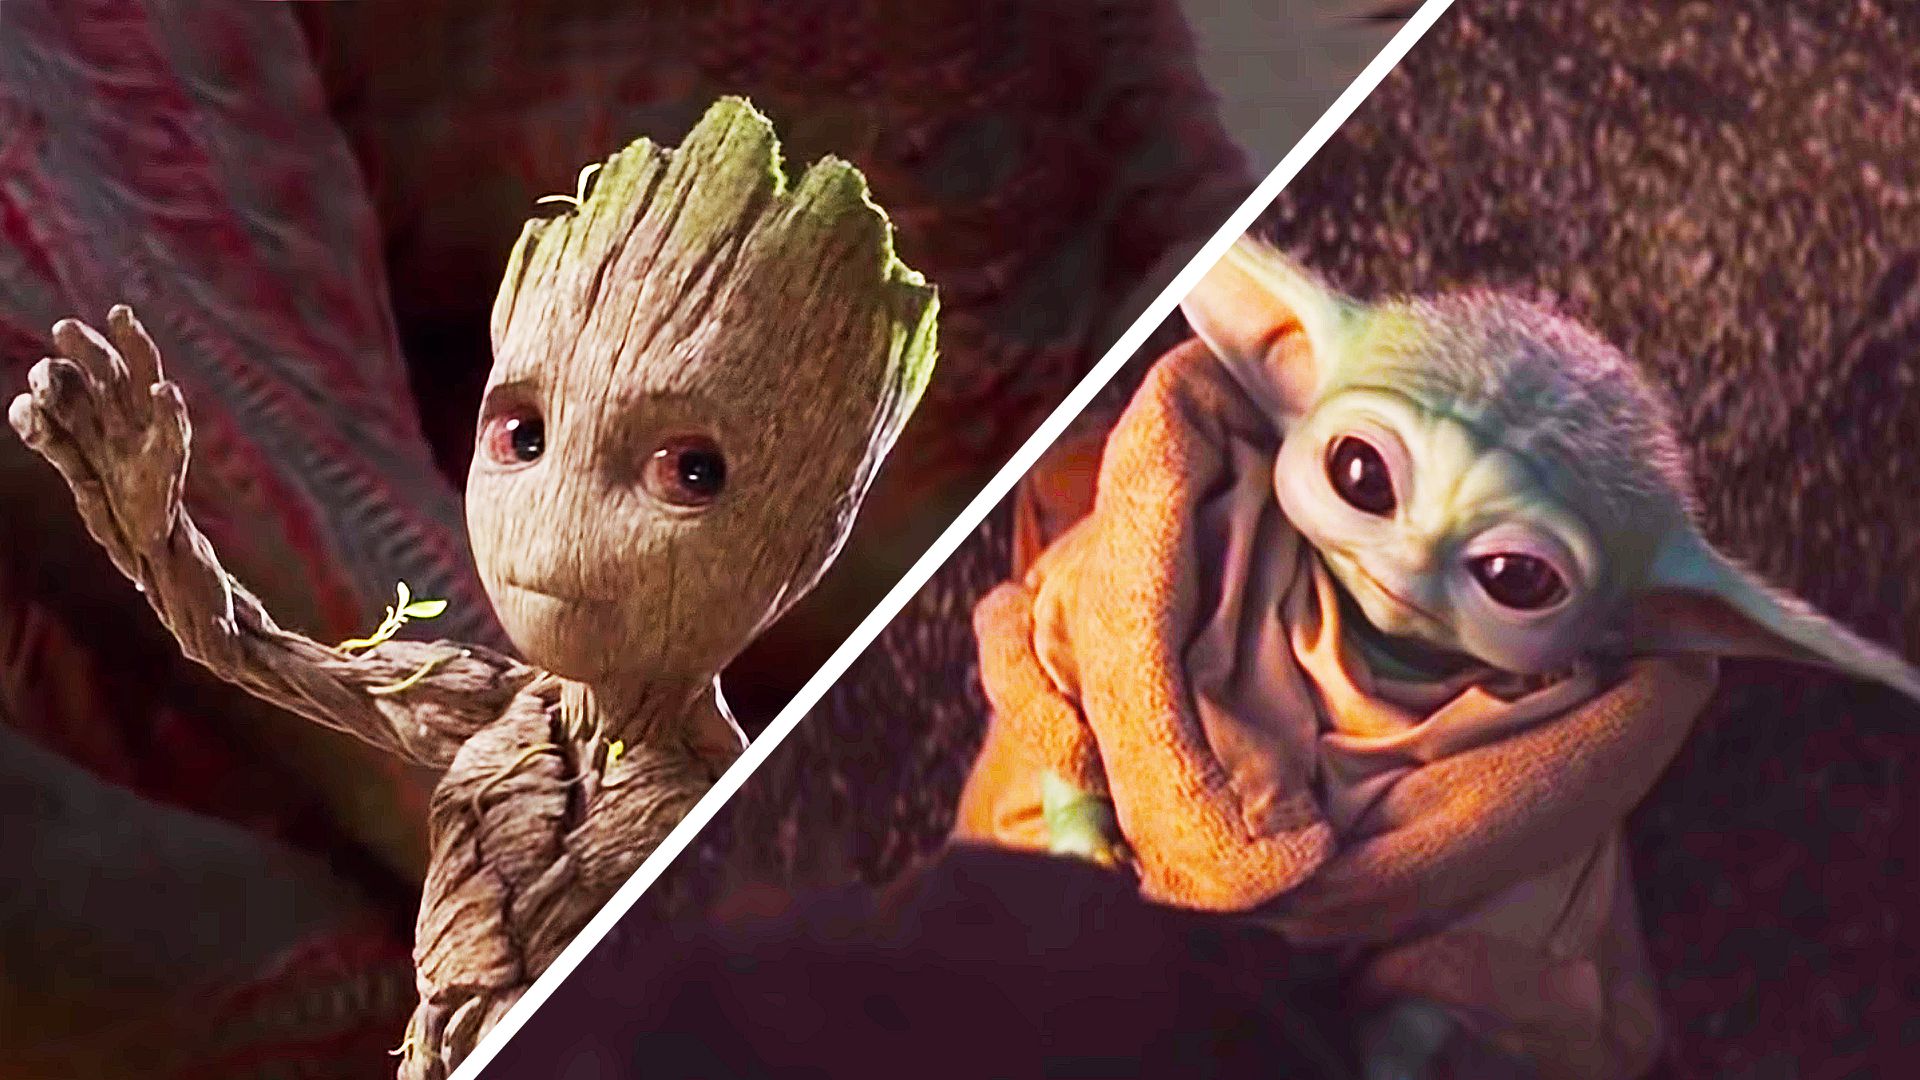 Take This Quiz to See if You're Baby Yoda or Baby Groot